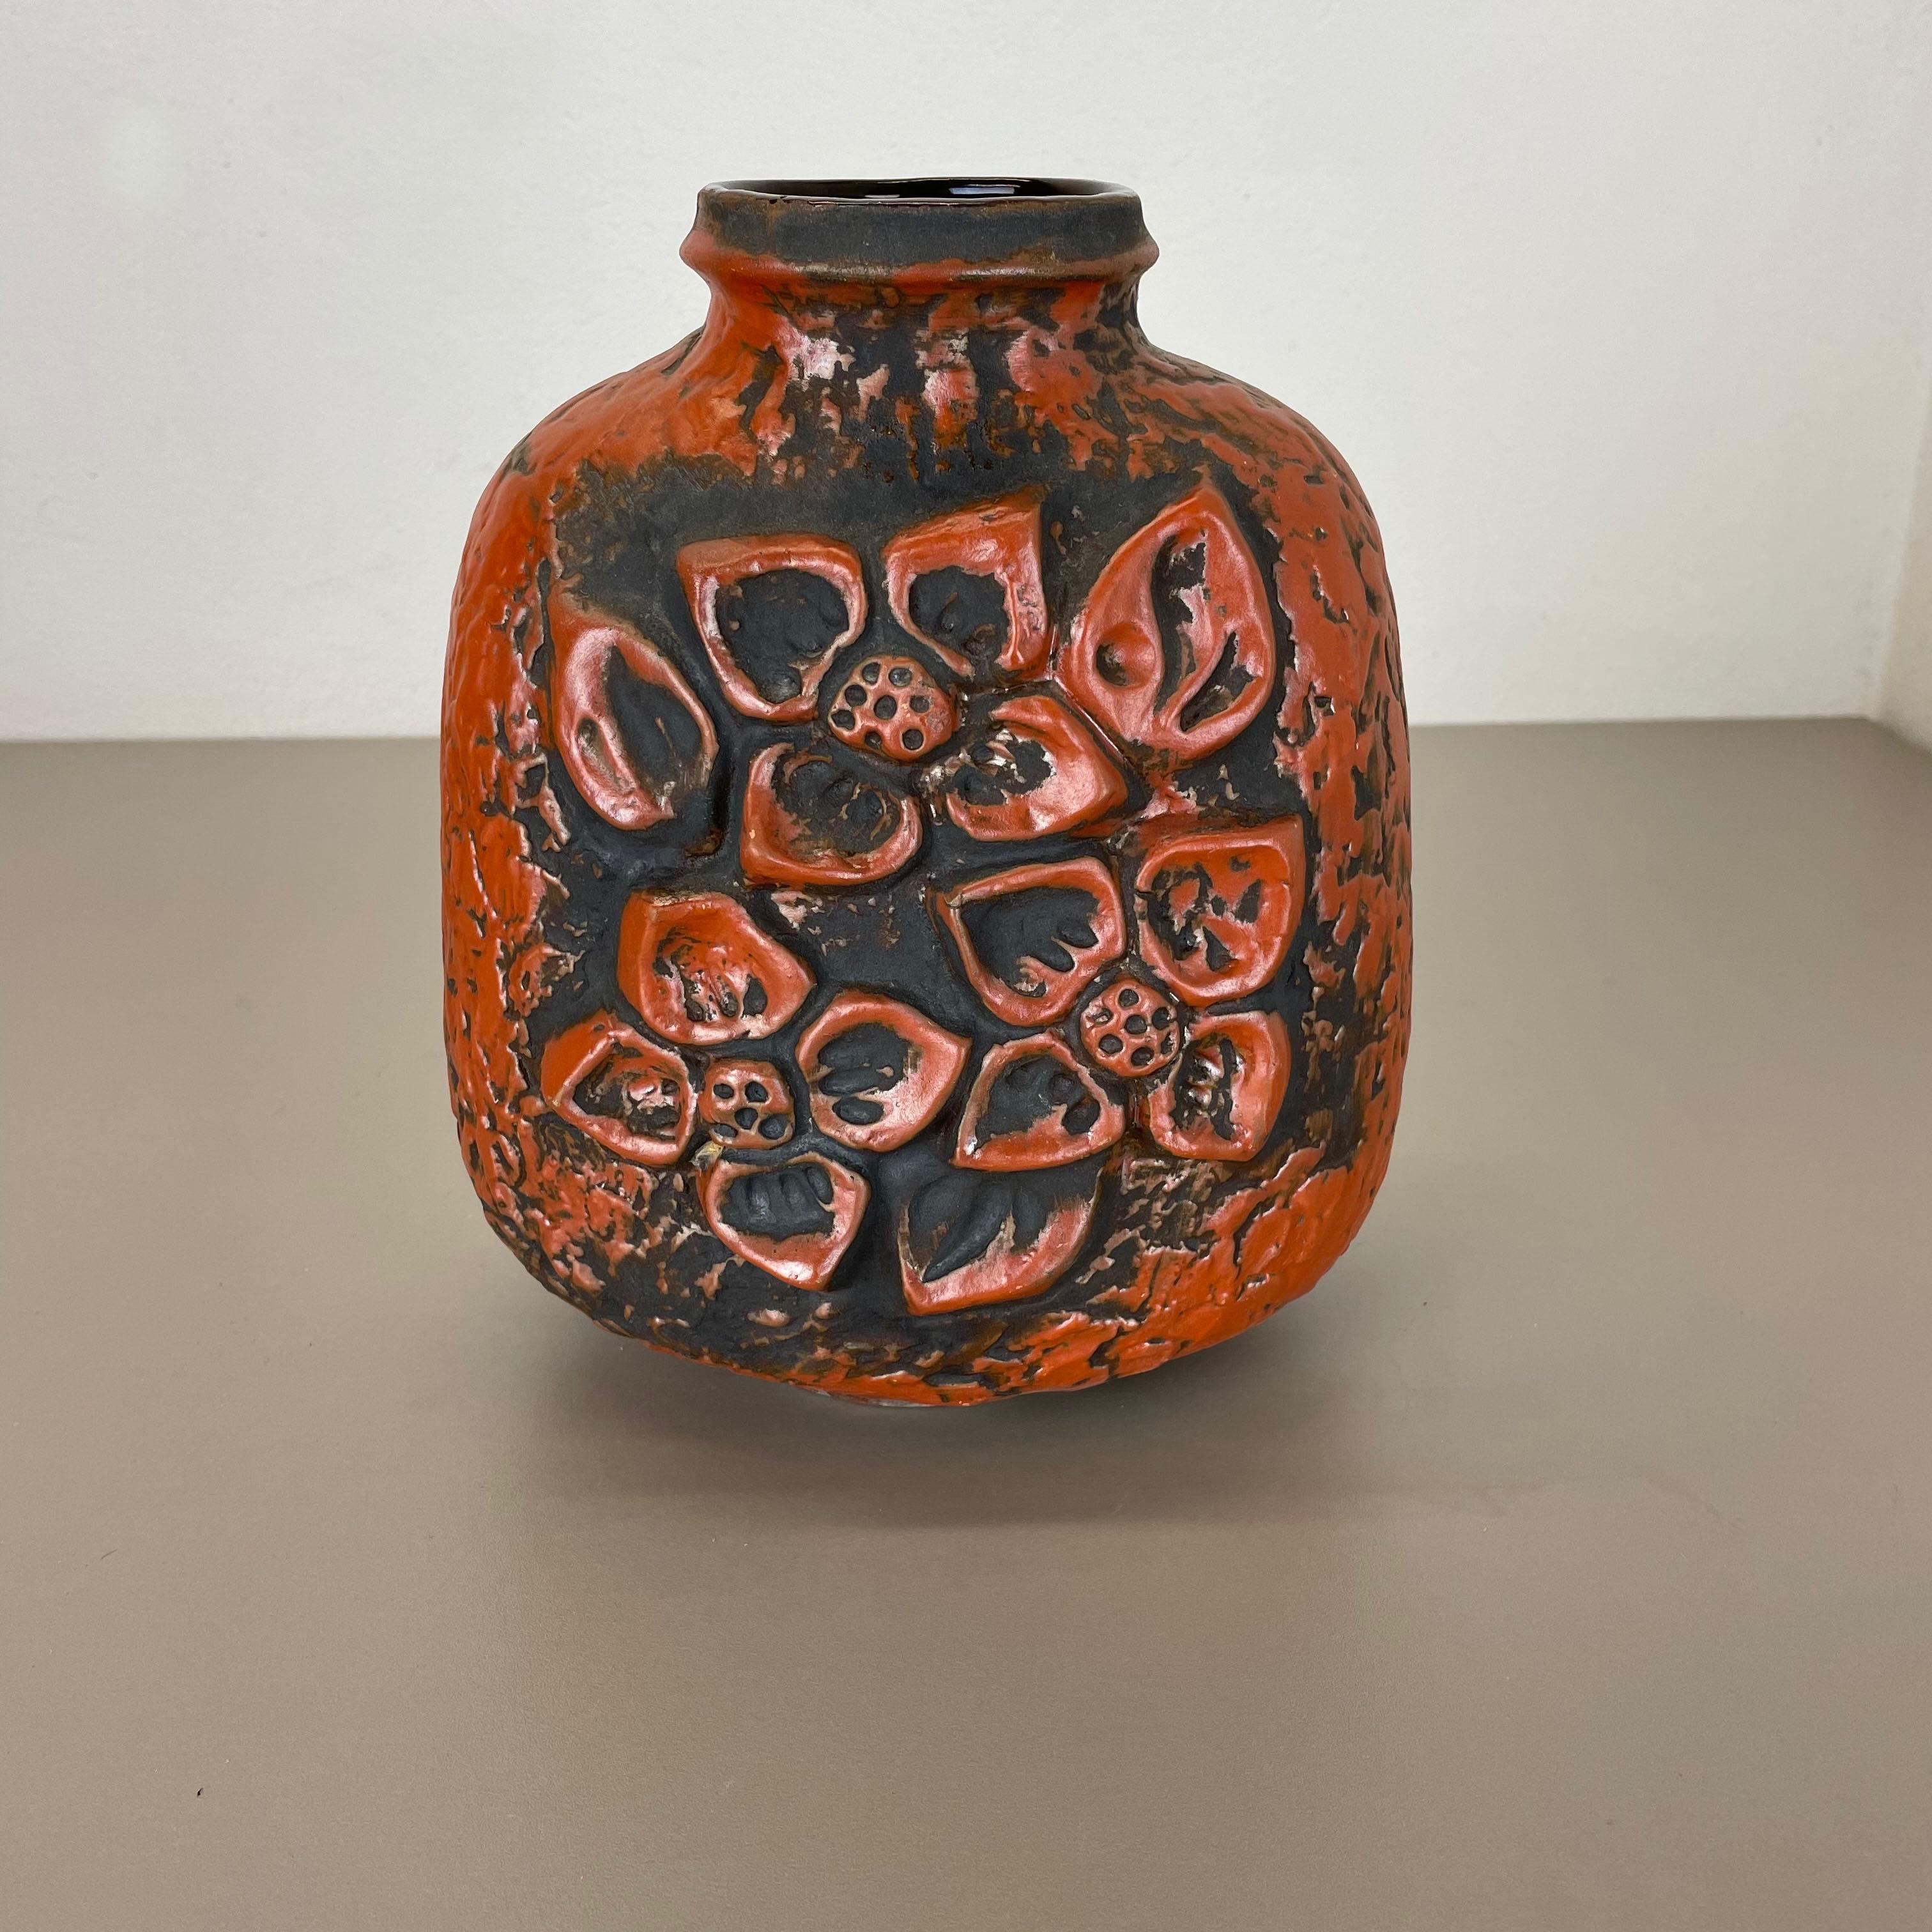 Article:

Ceramic pottery vase


Origin:

Germany


Designer:

Heinz Siery


Producer:

Carstens Tönnieshof, Germany


Decade:

1970s


This original vintage pottery object was designed by Heinz Siery and produced by Cartens